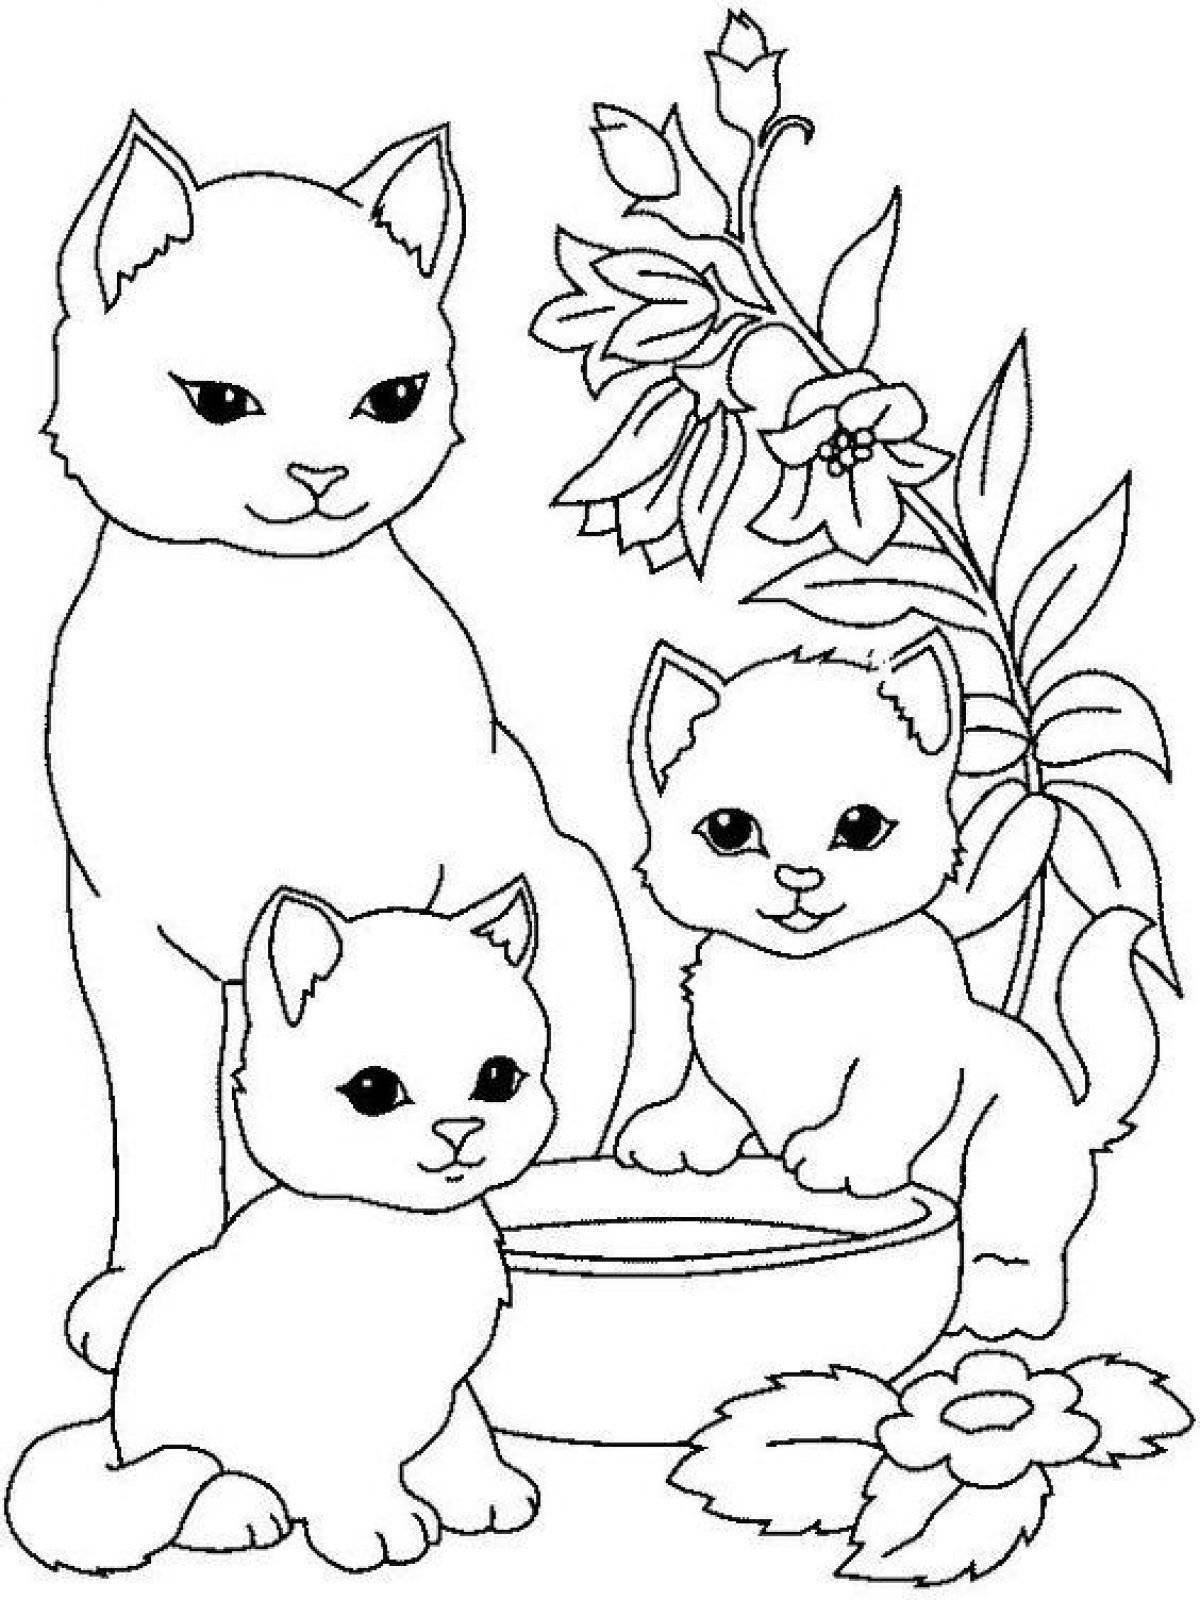 Cozy cat coloring book for kids 2-3 years old